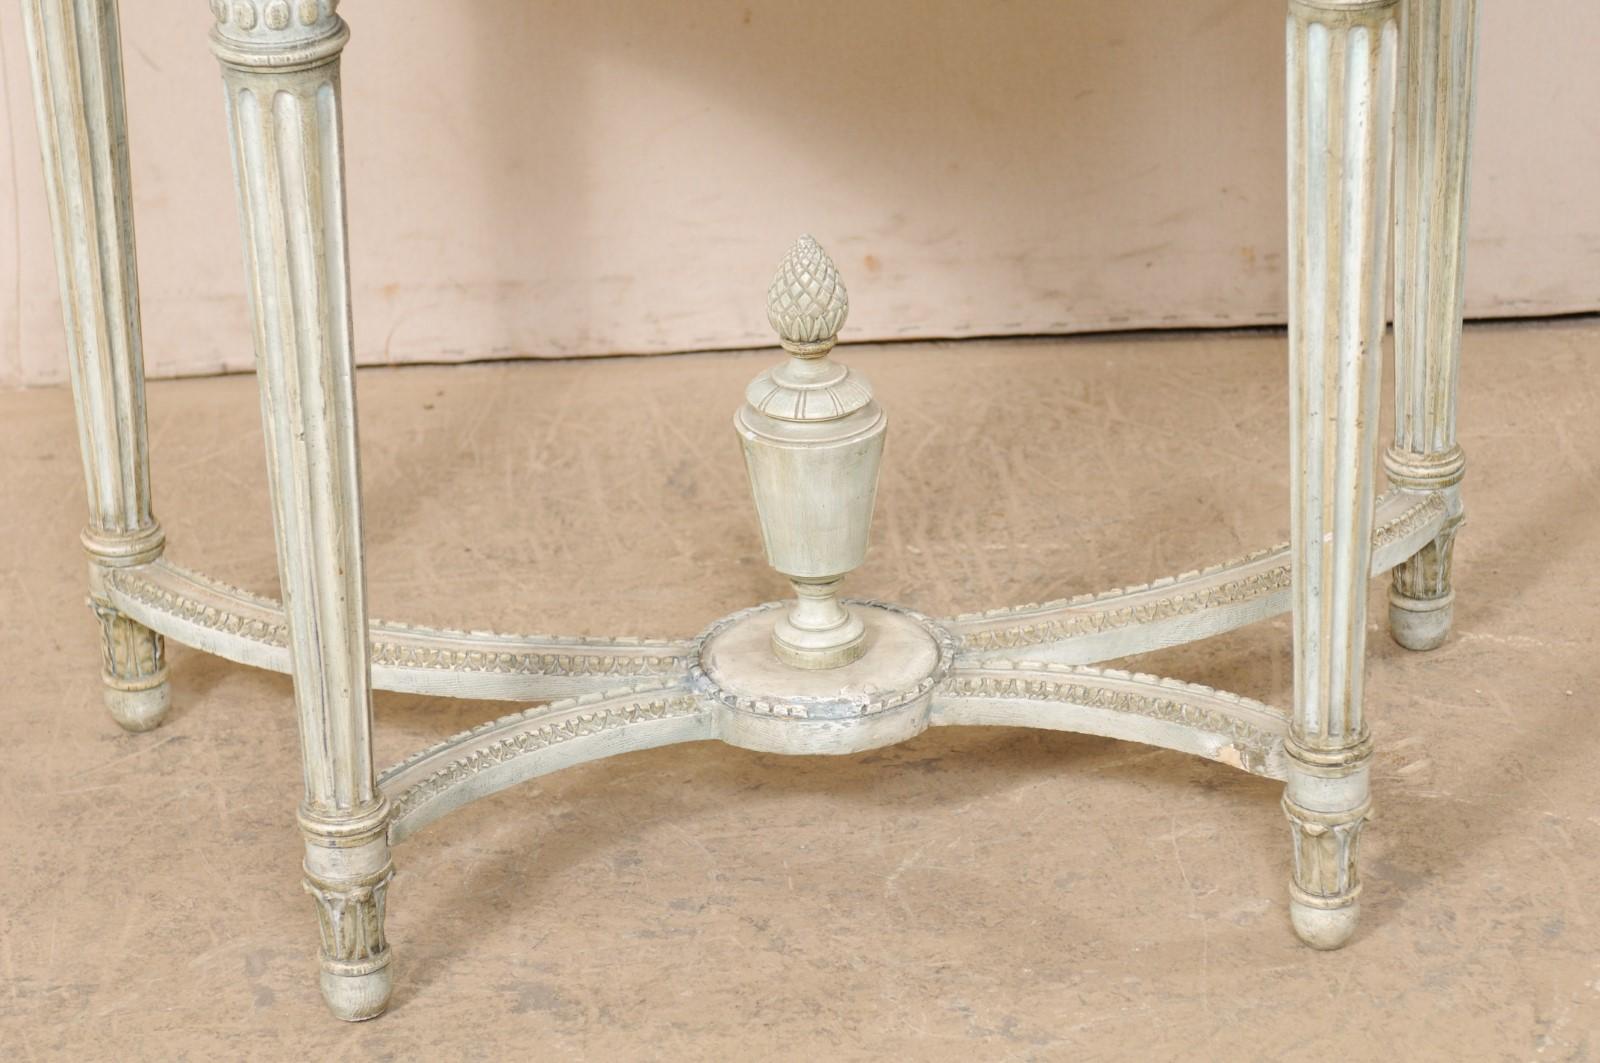 French Neoclassic Period Marble Top Console w/Carved Urn Finial at Underside For Sale 7